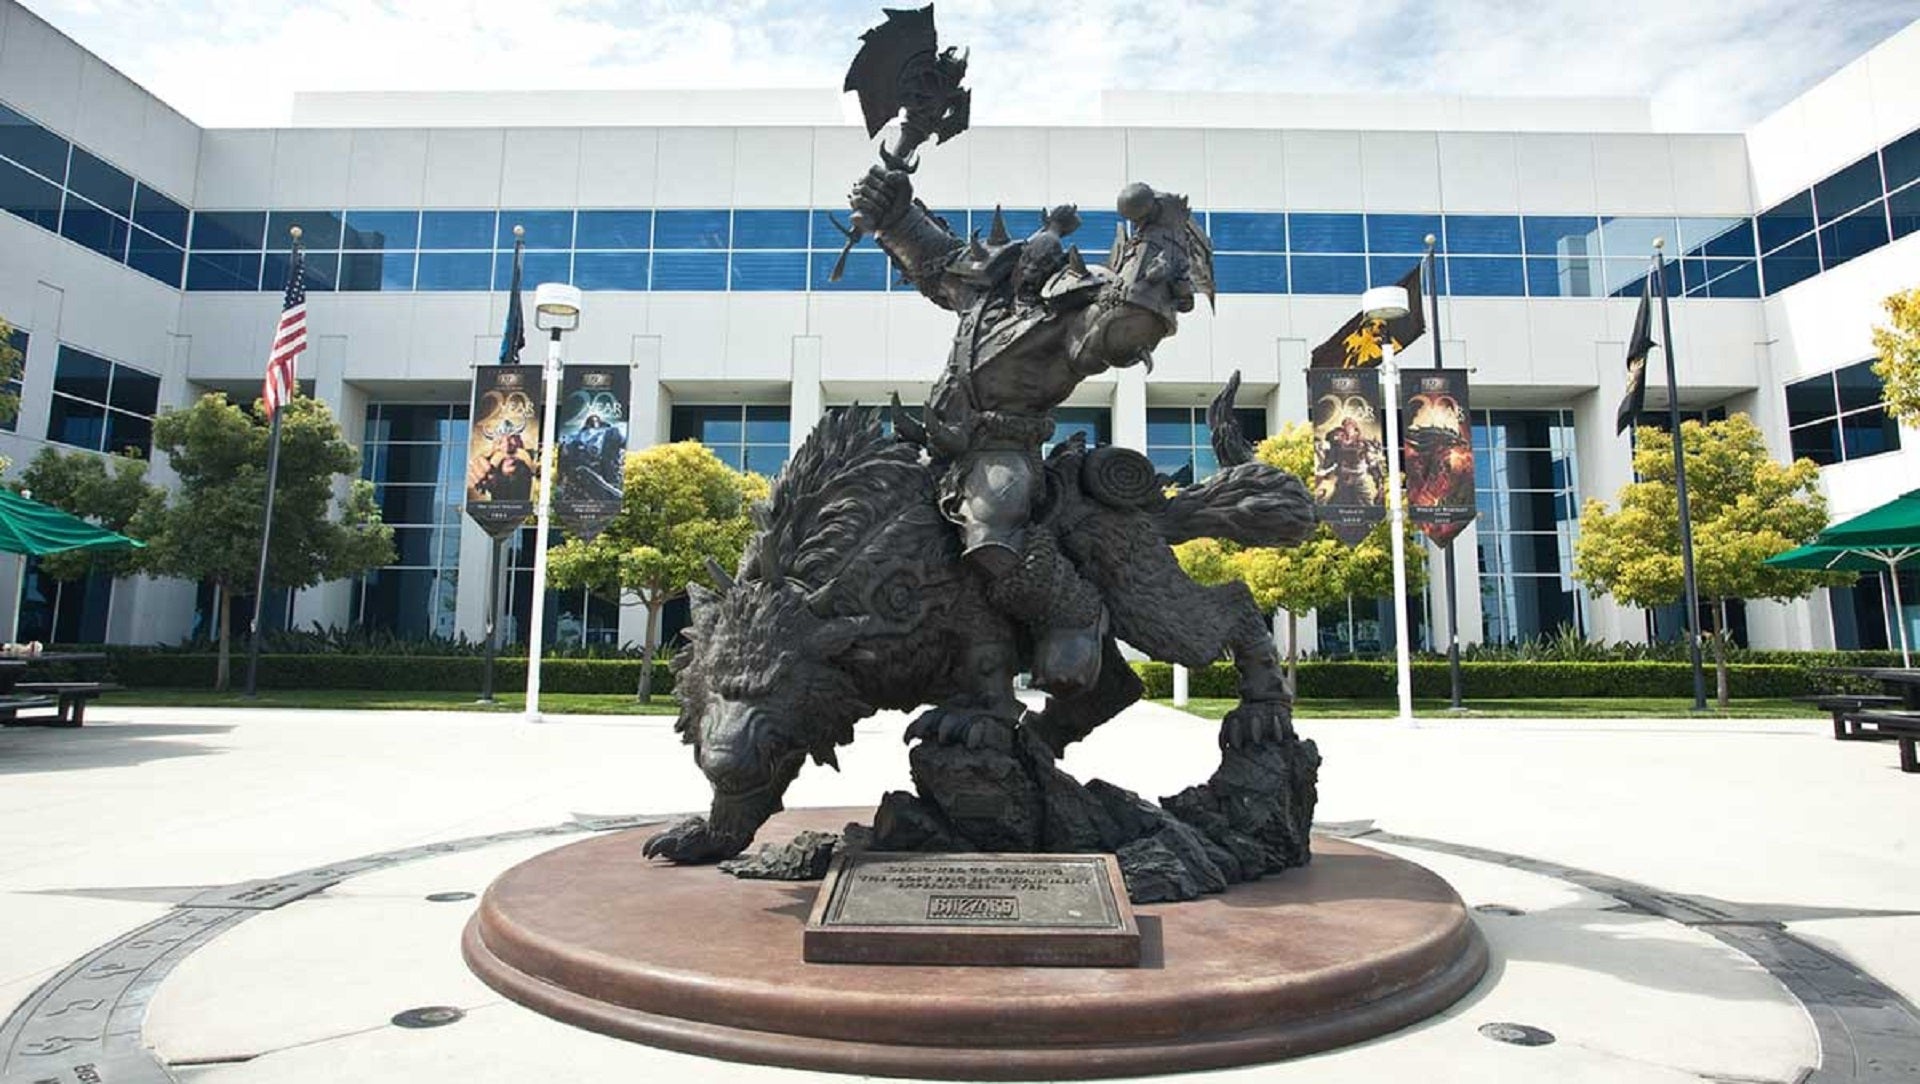 Big orc statue outside Activision Blizzard